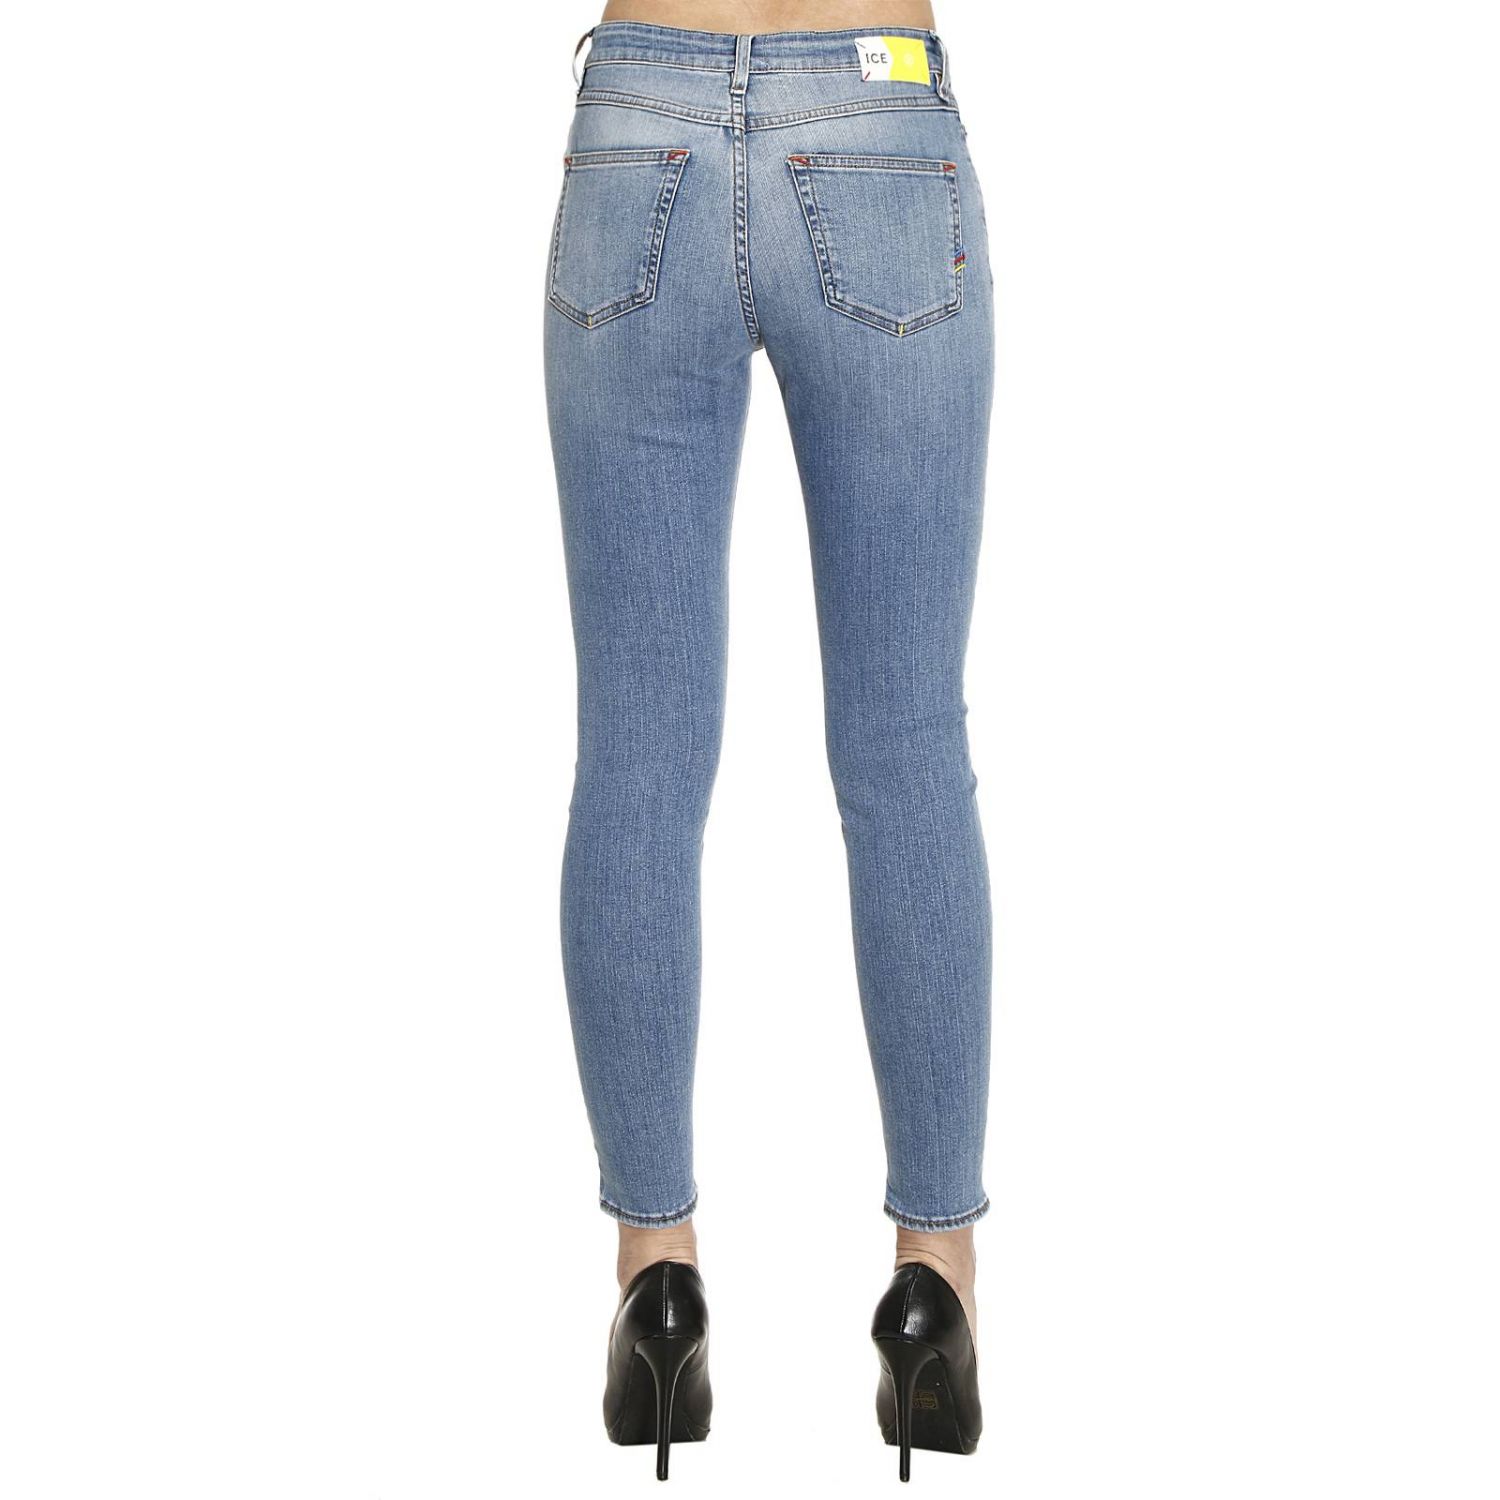 Ice Play Outlet: Jeans women | Jeans Ice Play Women Stone Washed ...